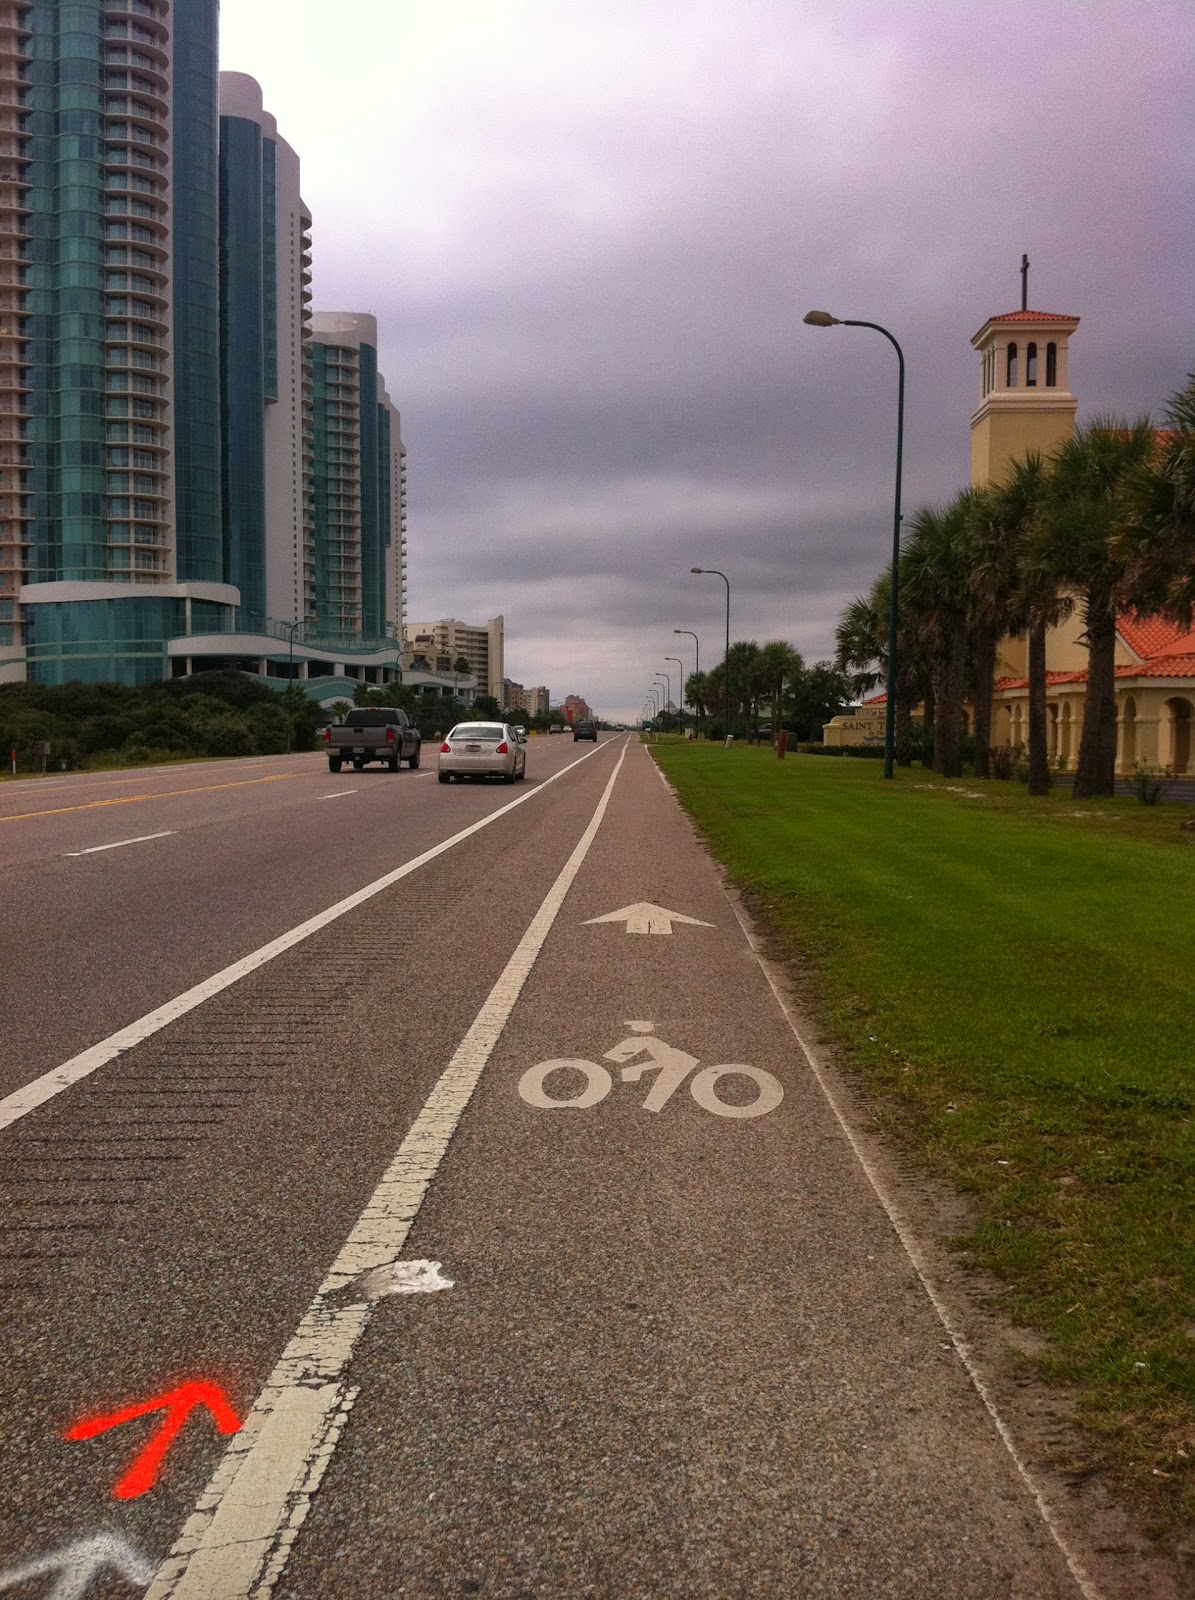 The Cycling Addiction Orange Beach And Gulf Shores Alabama in The Awesome as well as Interesting cycling orange beach al intended for Found House